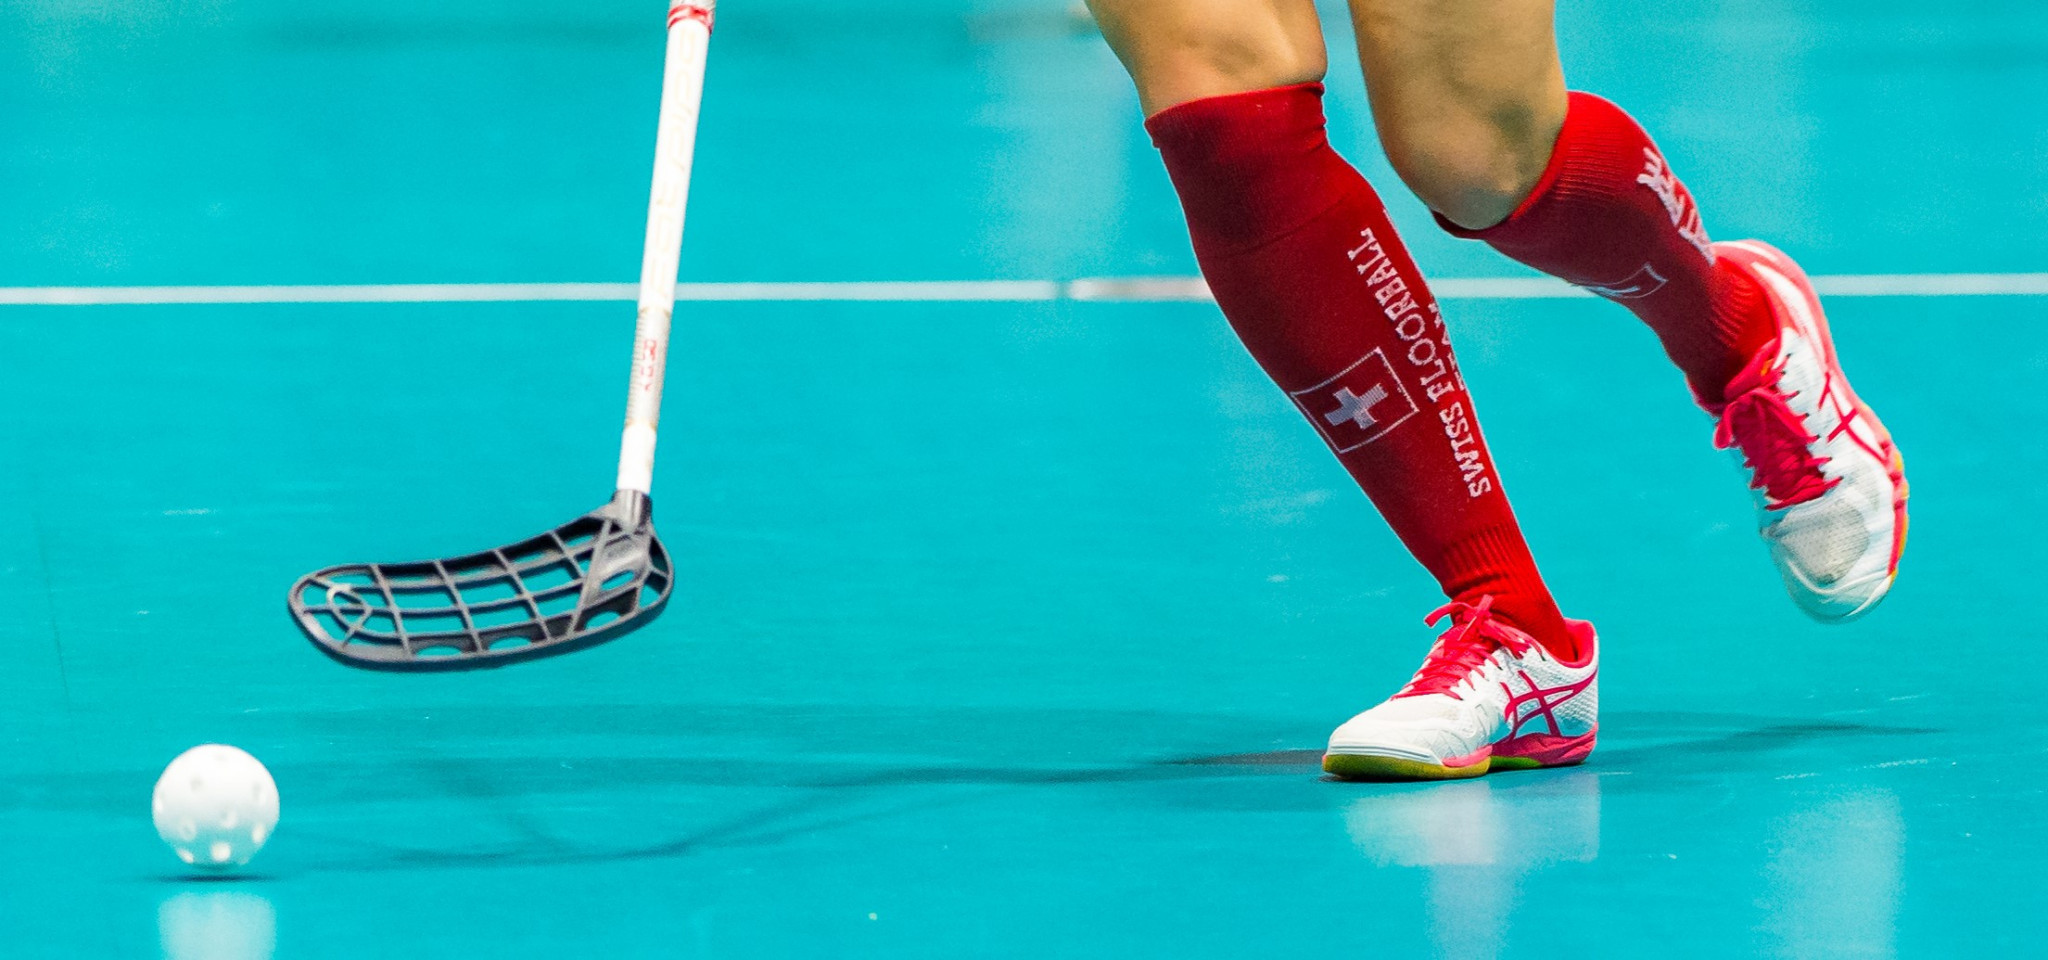 Swiss town Neuchâtel has been awarded the hosting rights to the 2019 Women’s World Floorball Championships ©Getty Images